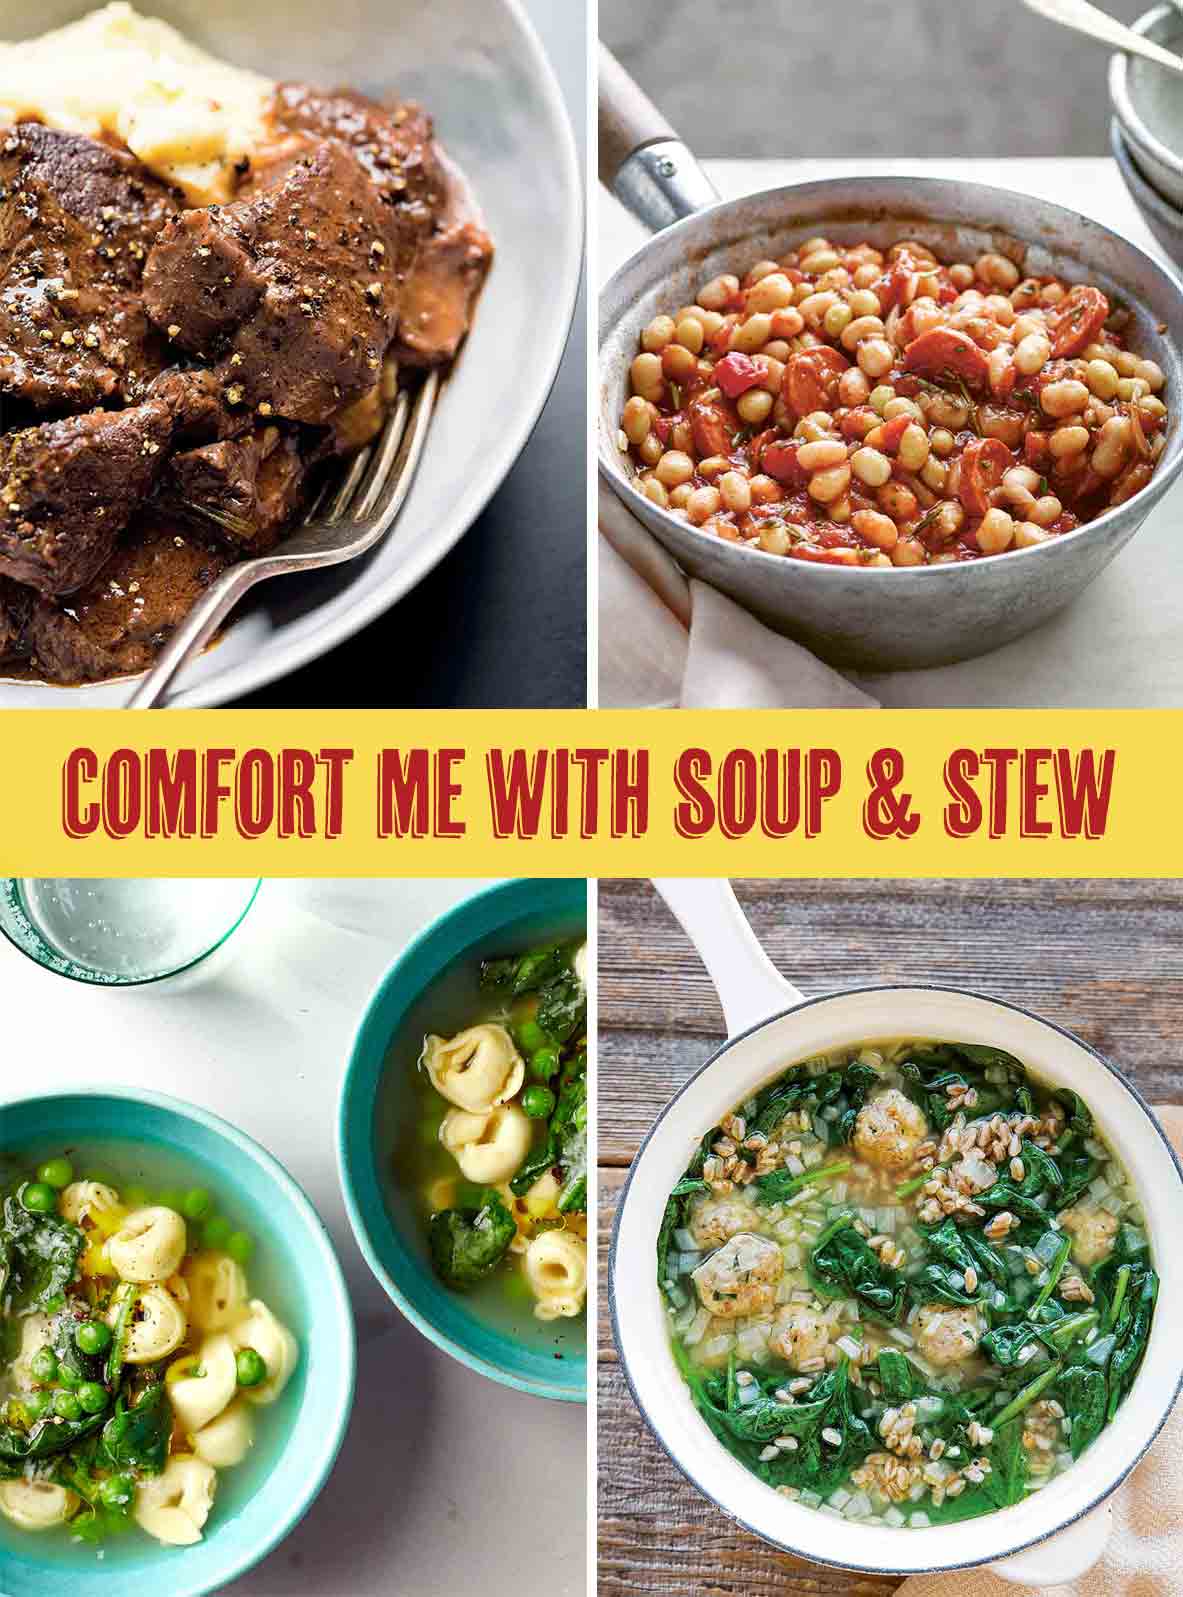 A bowl of beef stew, a bowl of beans, a tortellini soup, a pot of turkey meatball soup.  The title is: "Comfort me with soup and stew."